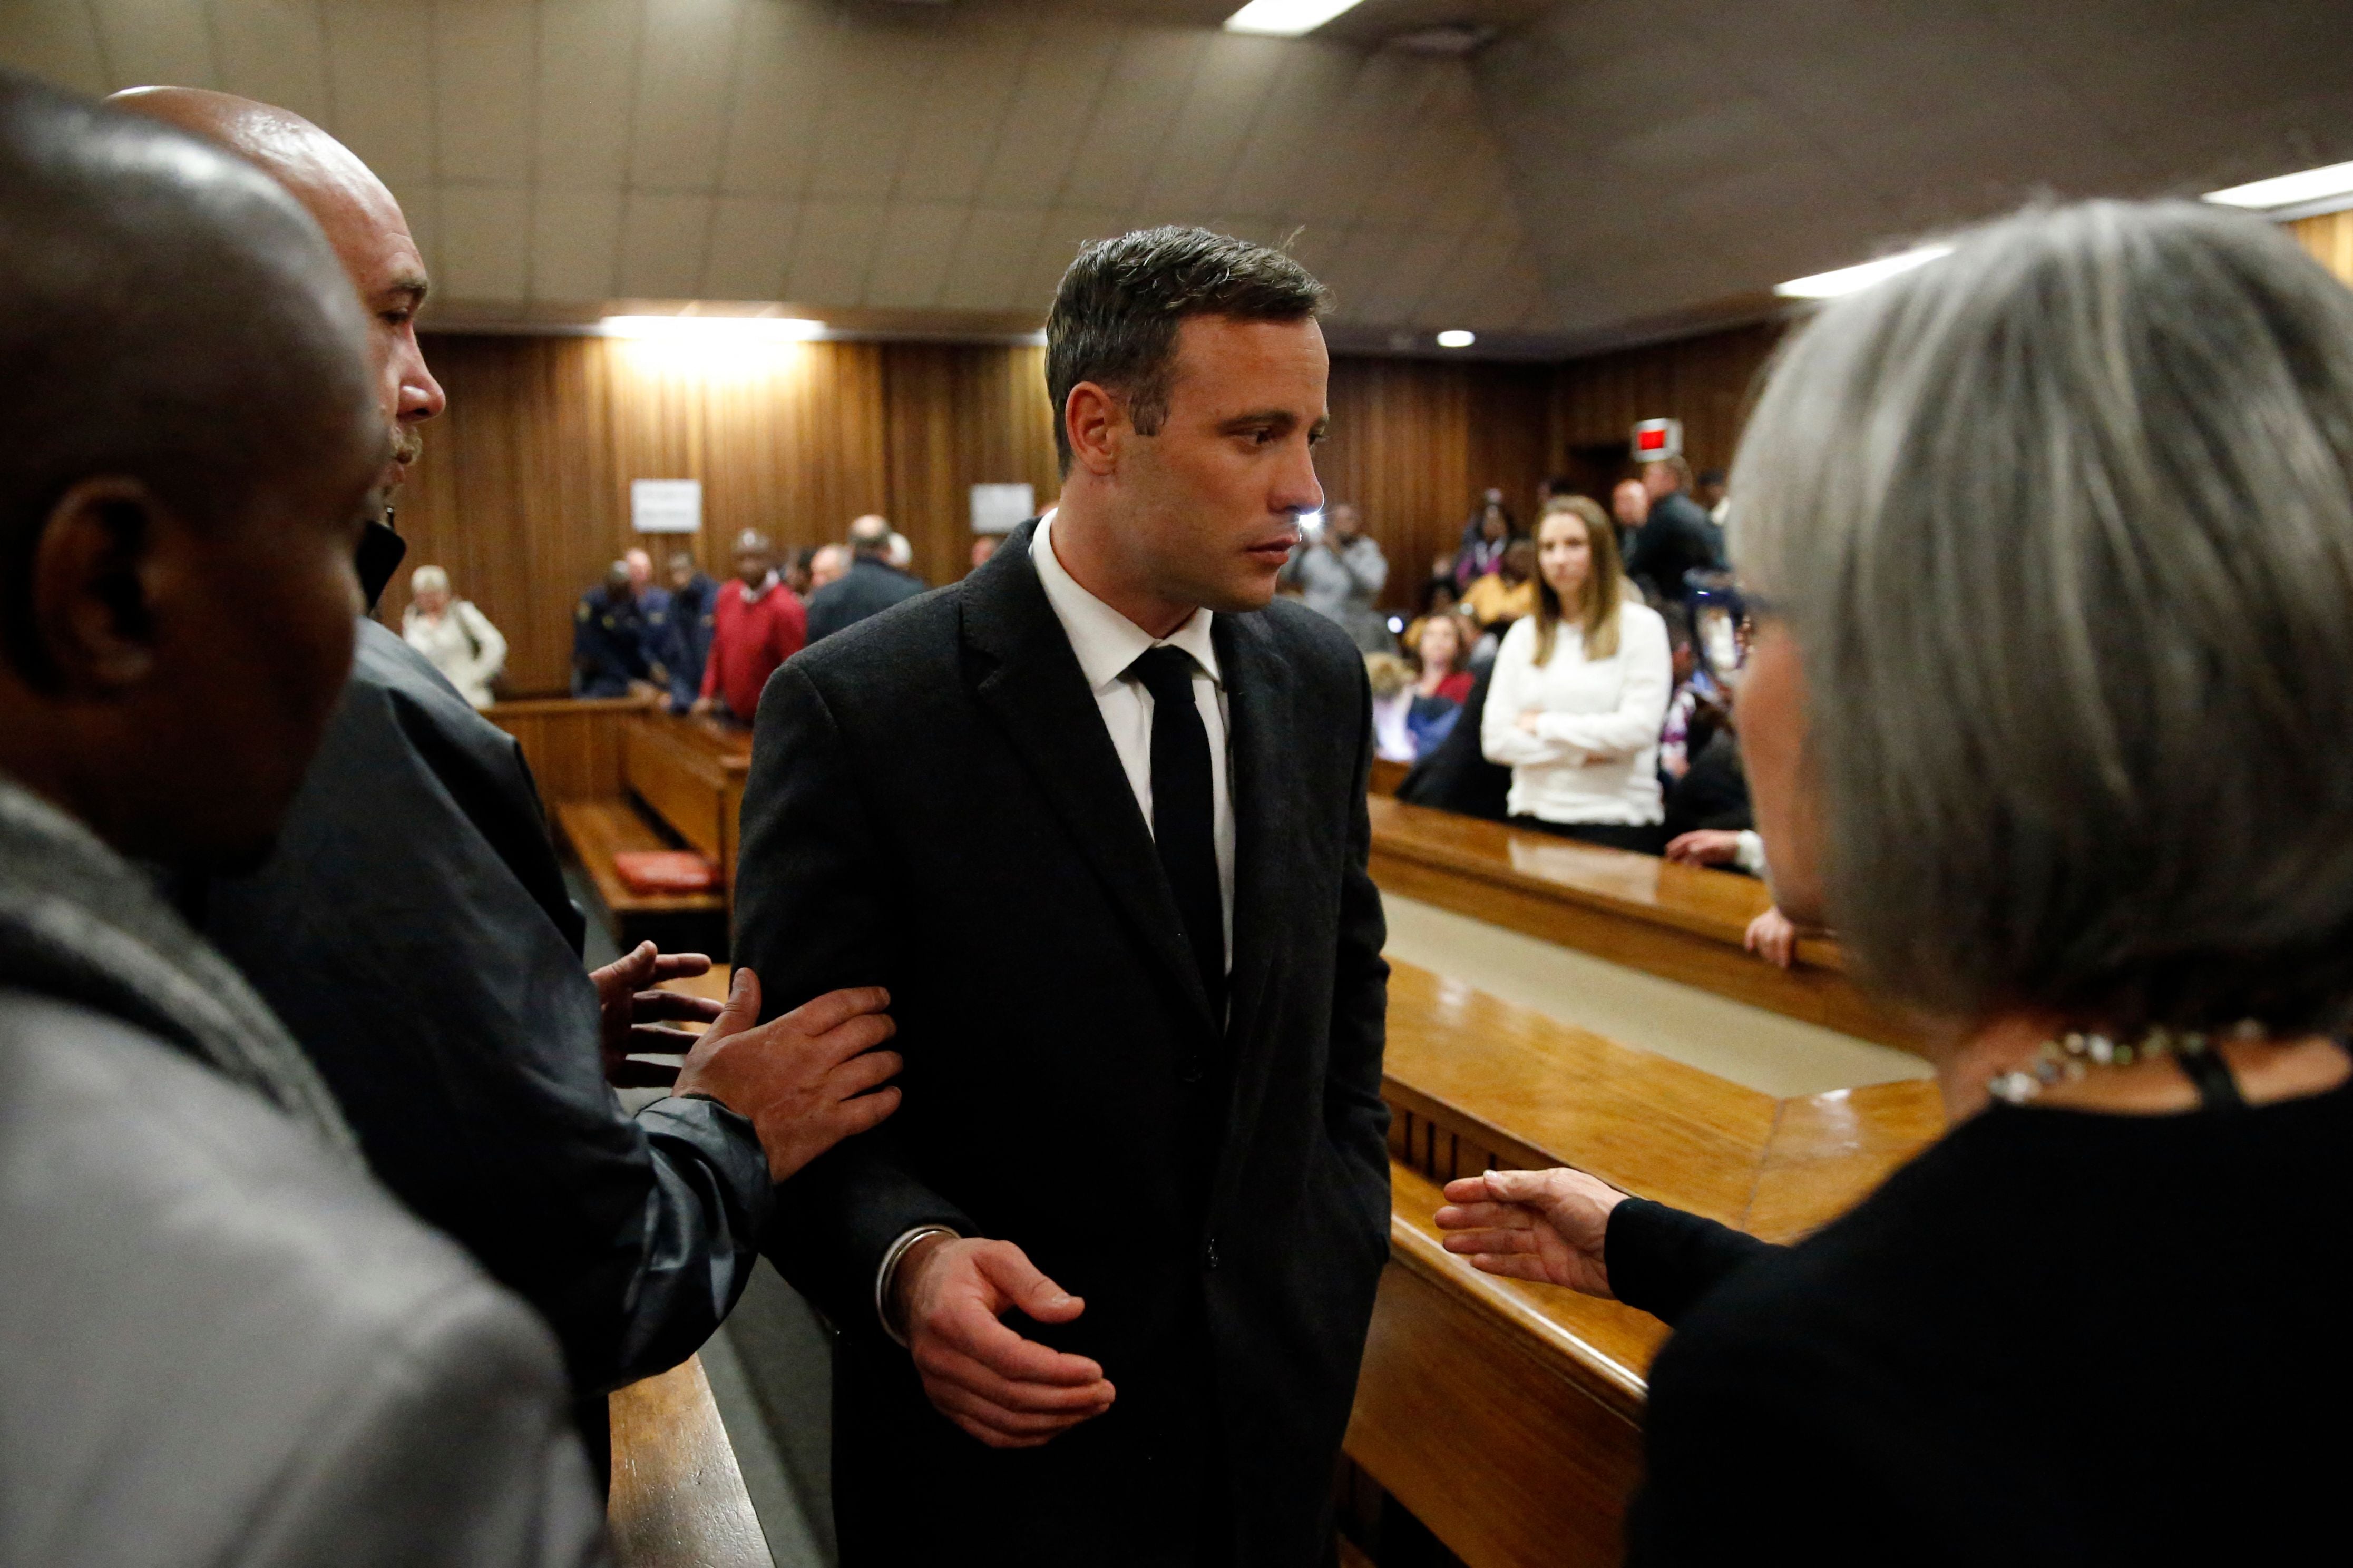 Oscar Pistorius speaks with relatives as he leaves the High Court in Pretoria in 2016